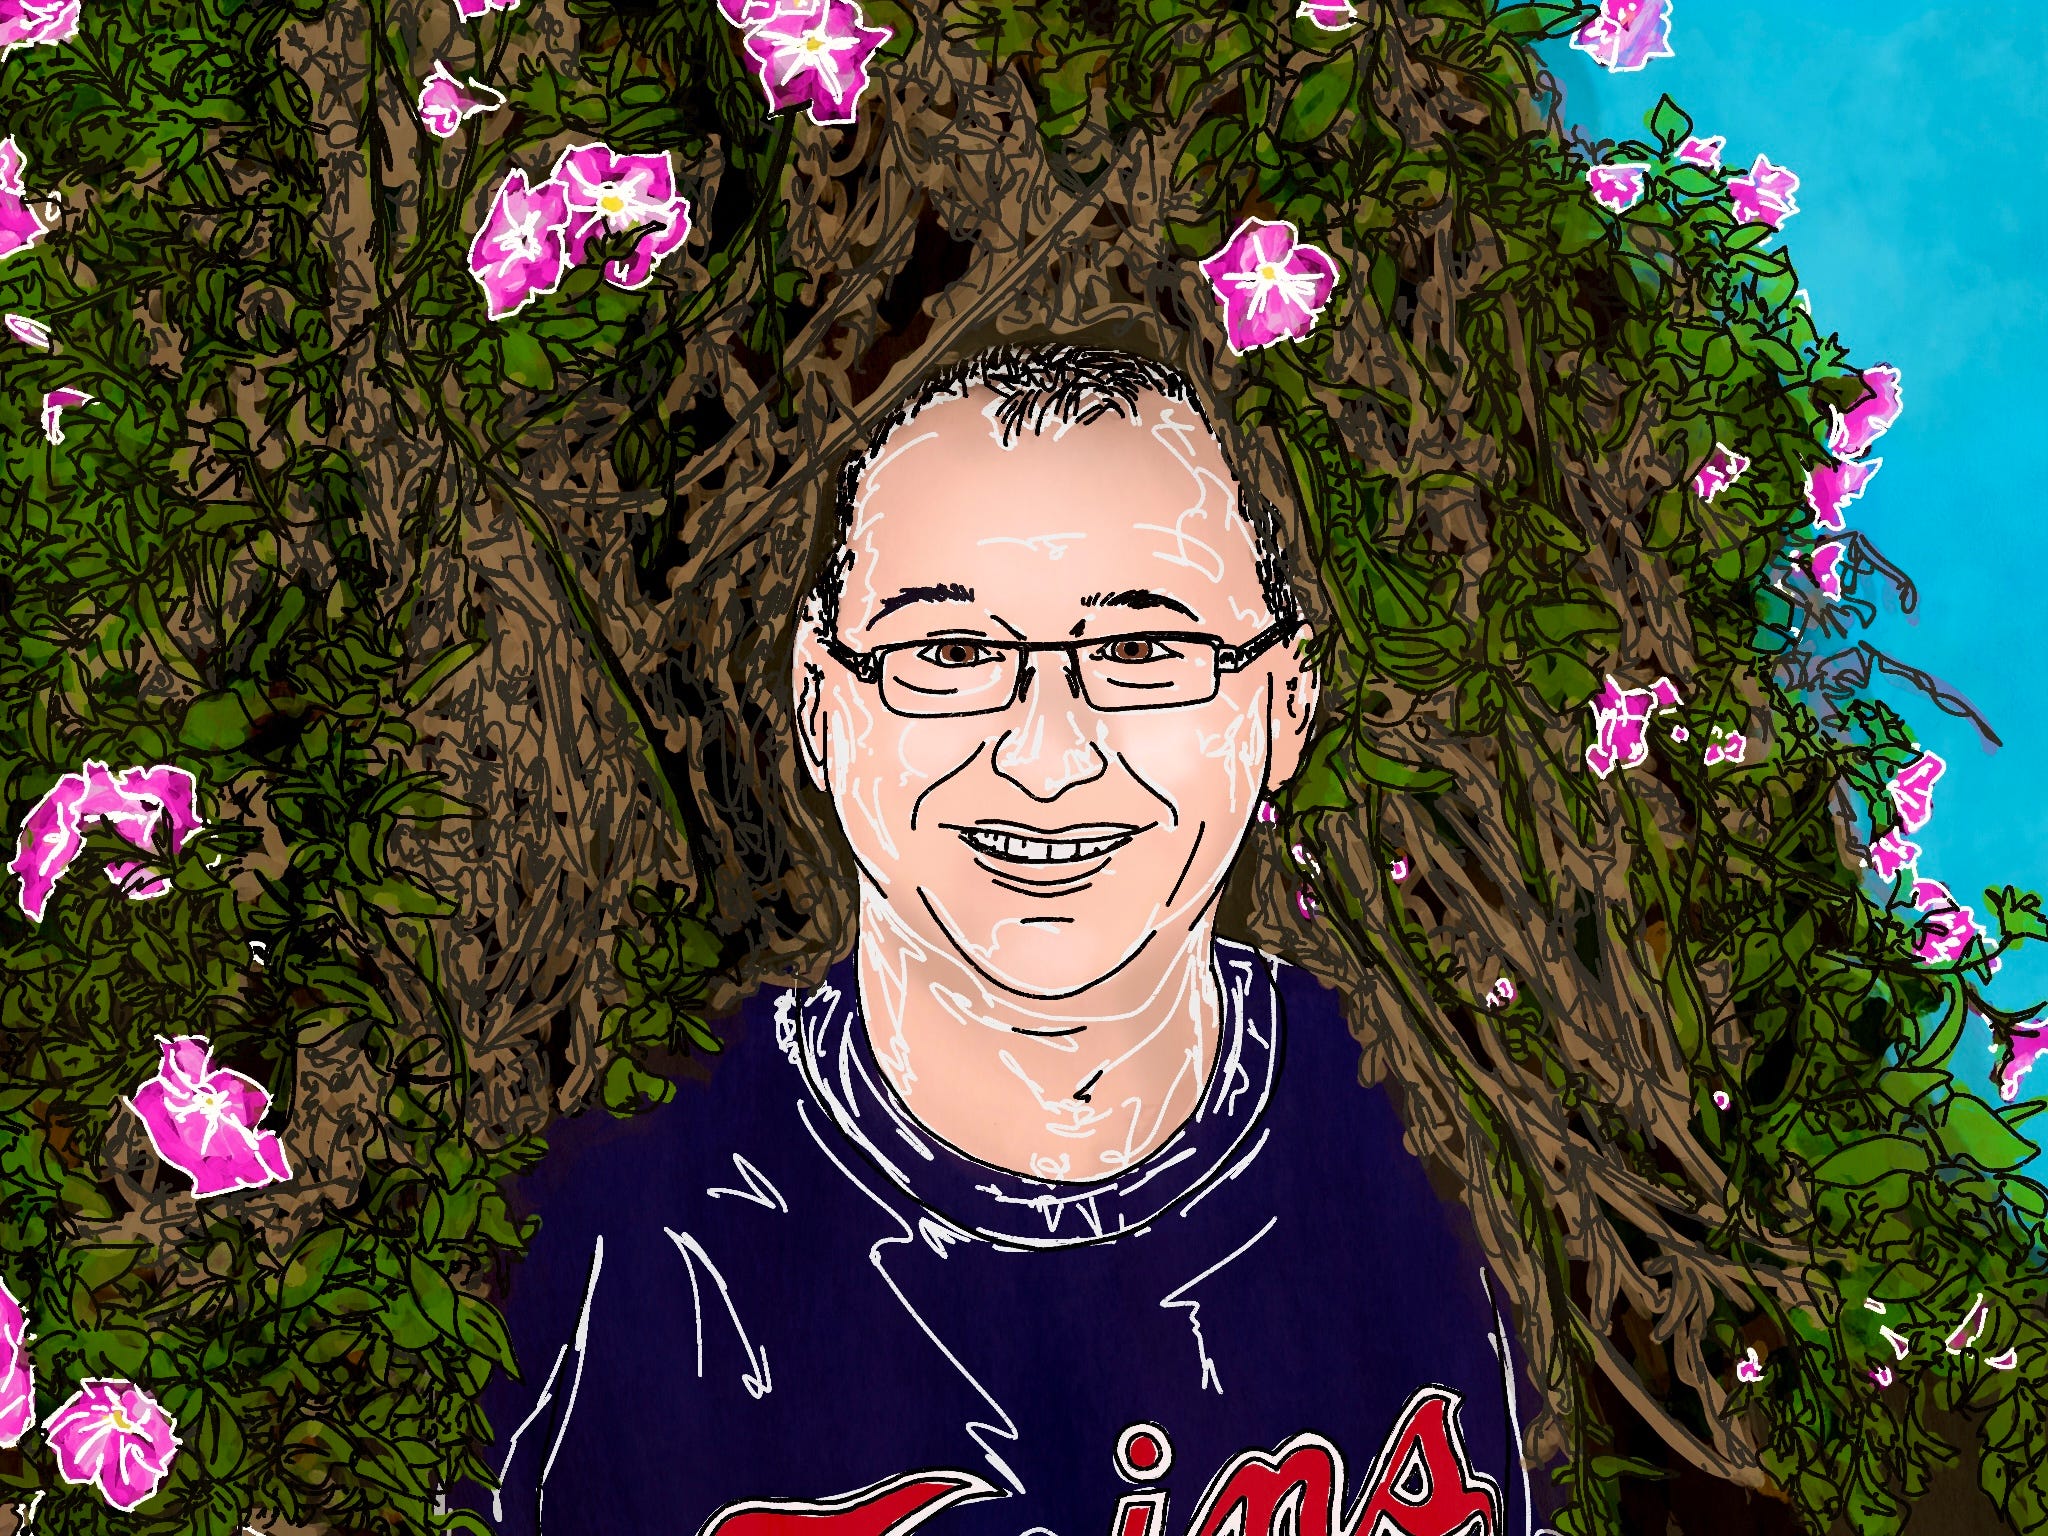 An digital illustrated portrait I made of my dad from a photo of him standing in a vine-covered hut full of pink flowers set against a brilliant sky blue. My dad is wearing a Twins baseball jersey and black glasses.